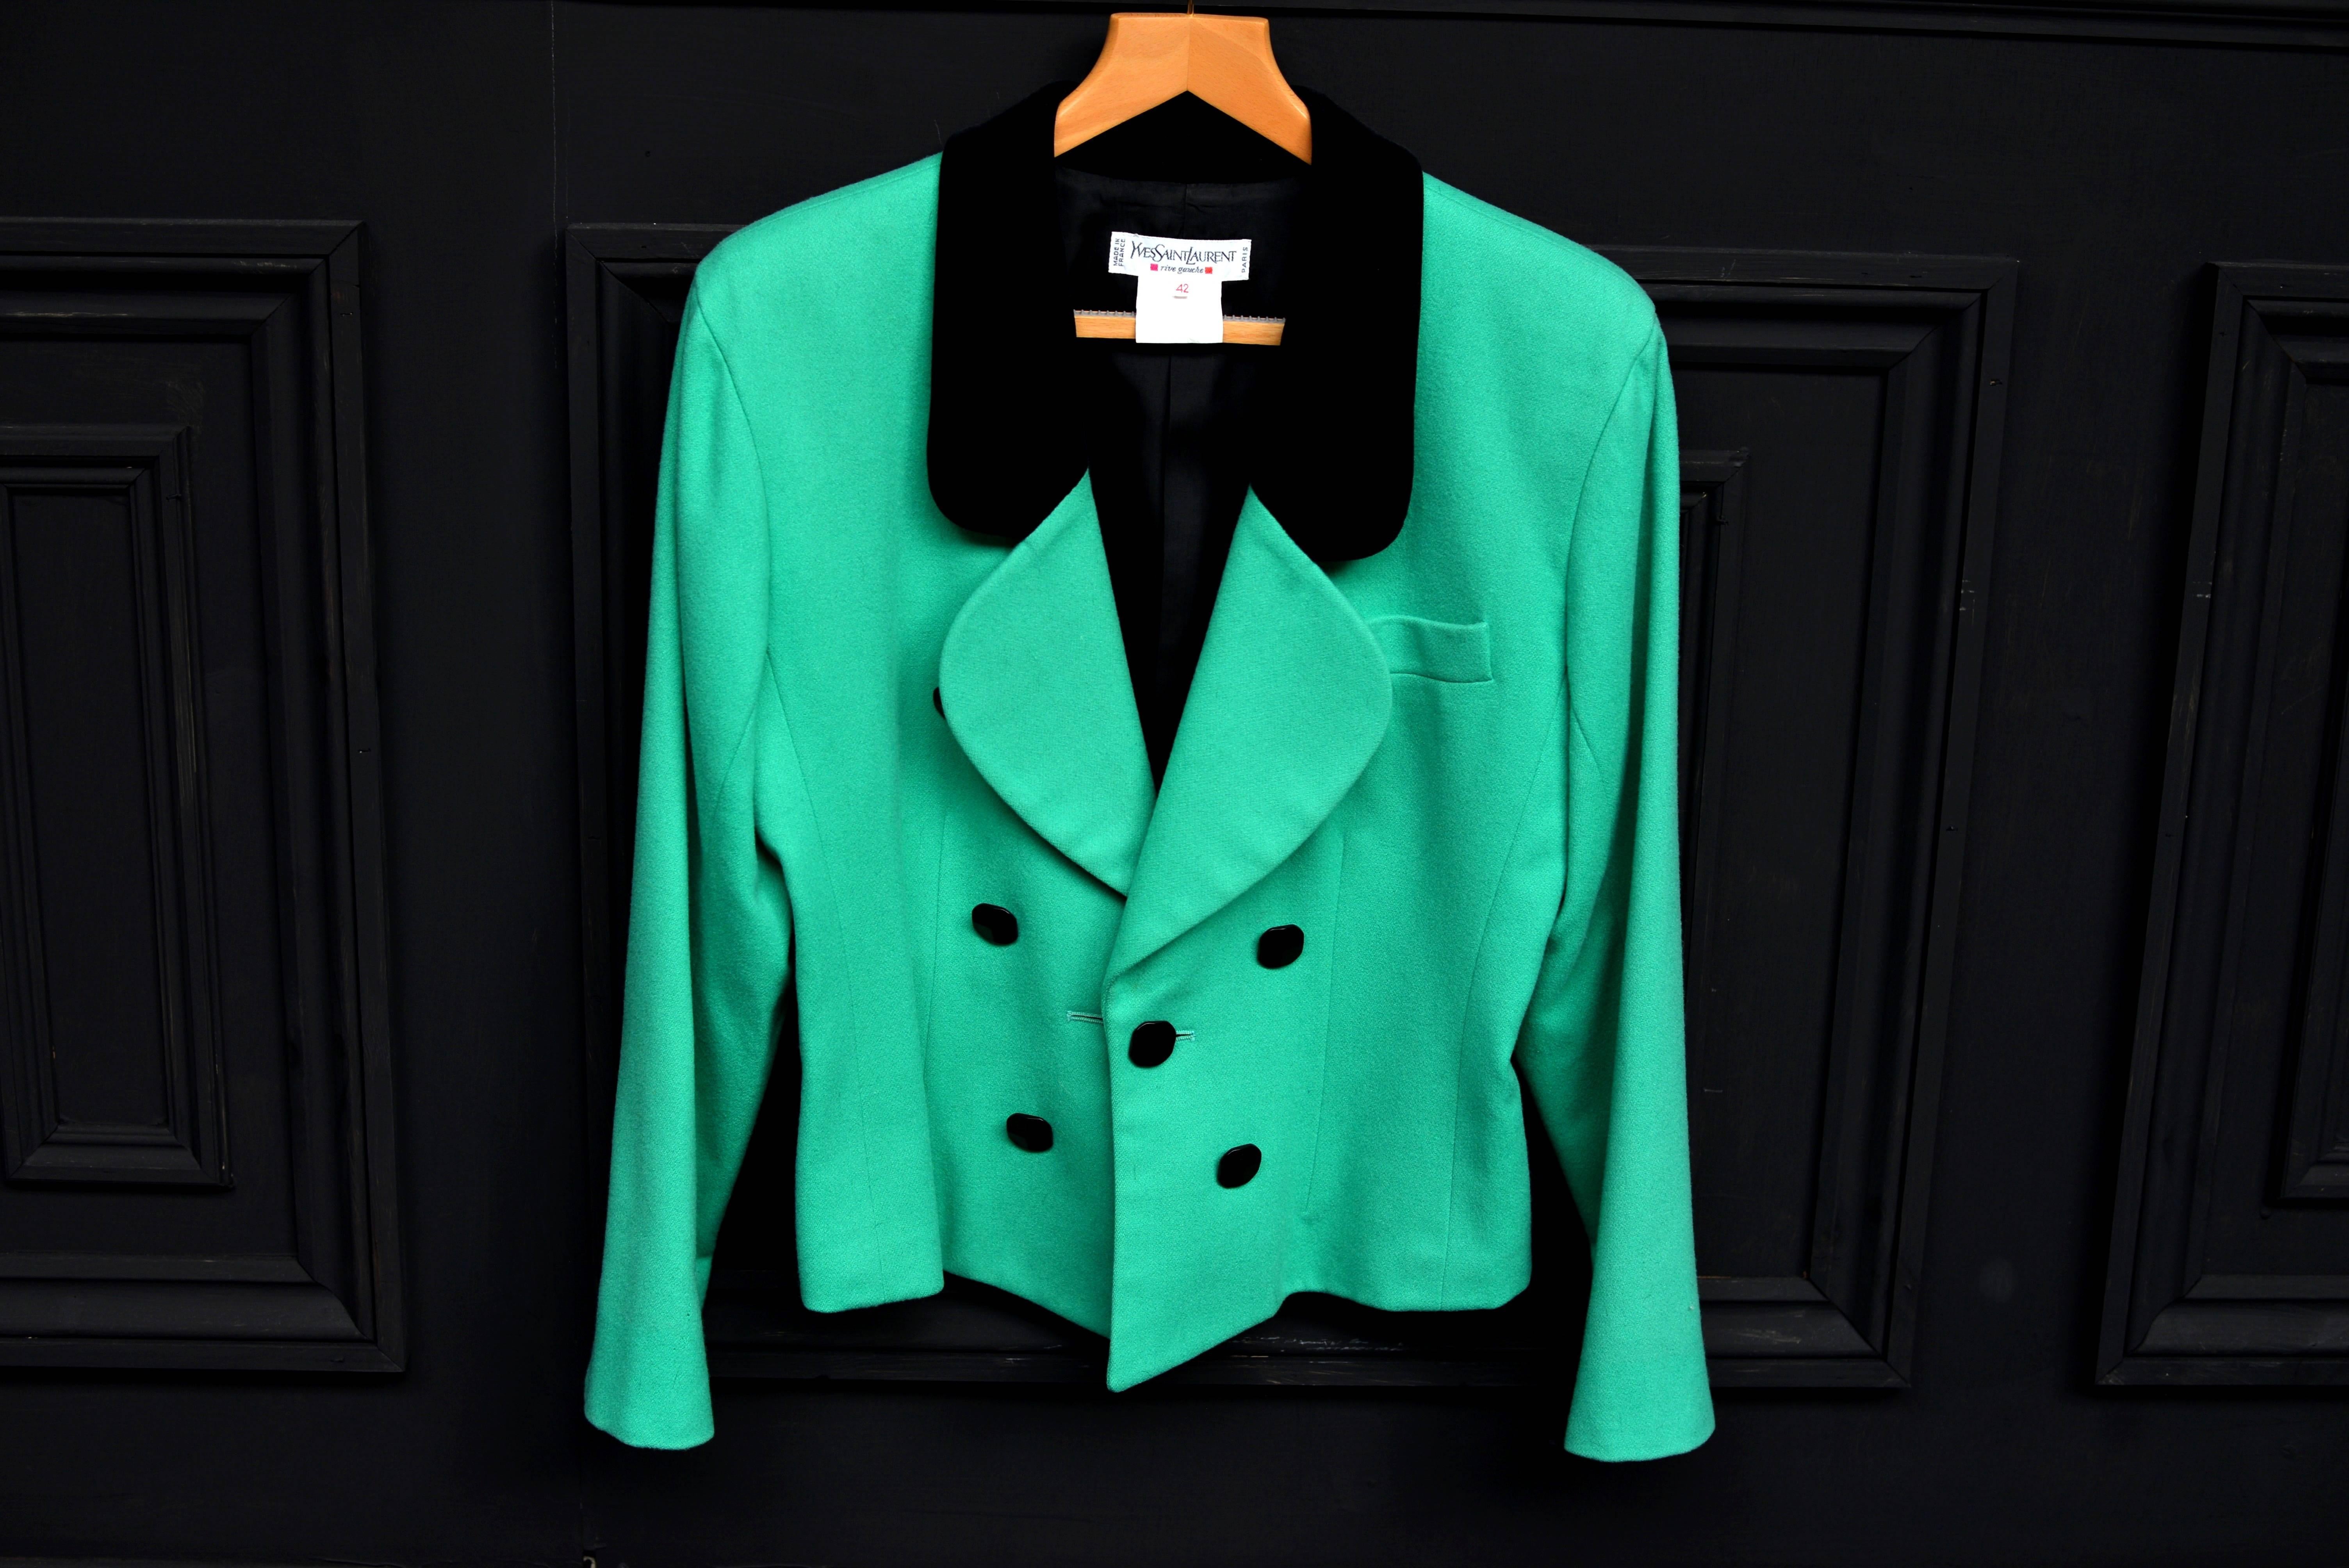 Yves Saint Laurent 100% wool woman jacket, tag size 42 with shoulder pads made in France.

Dimensions
- Armpit to Armpit 17'
- Sleeve length 22.5'
- Shoulder to shoulder 18'.